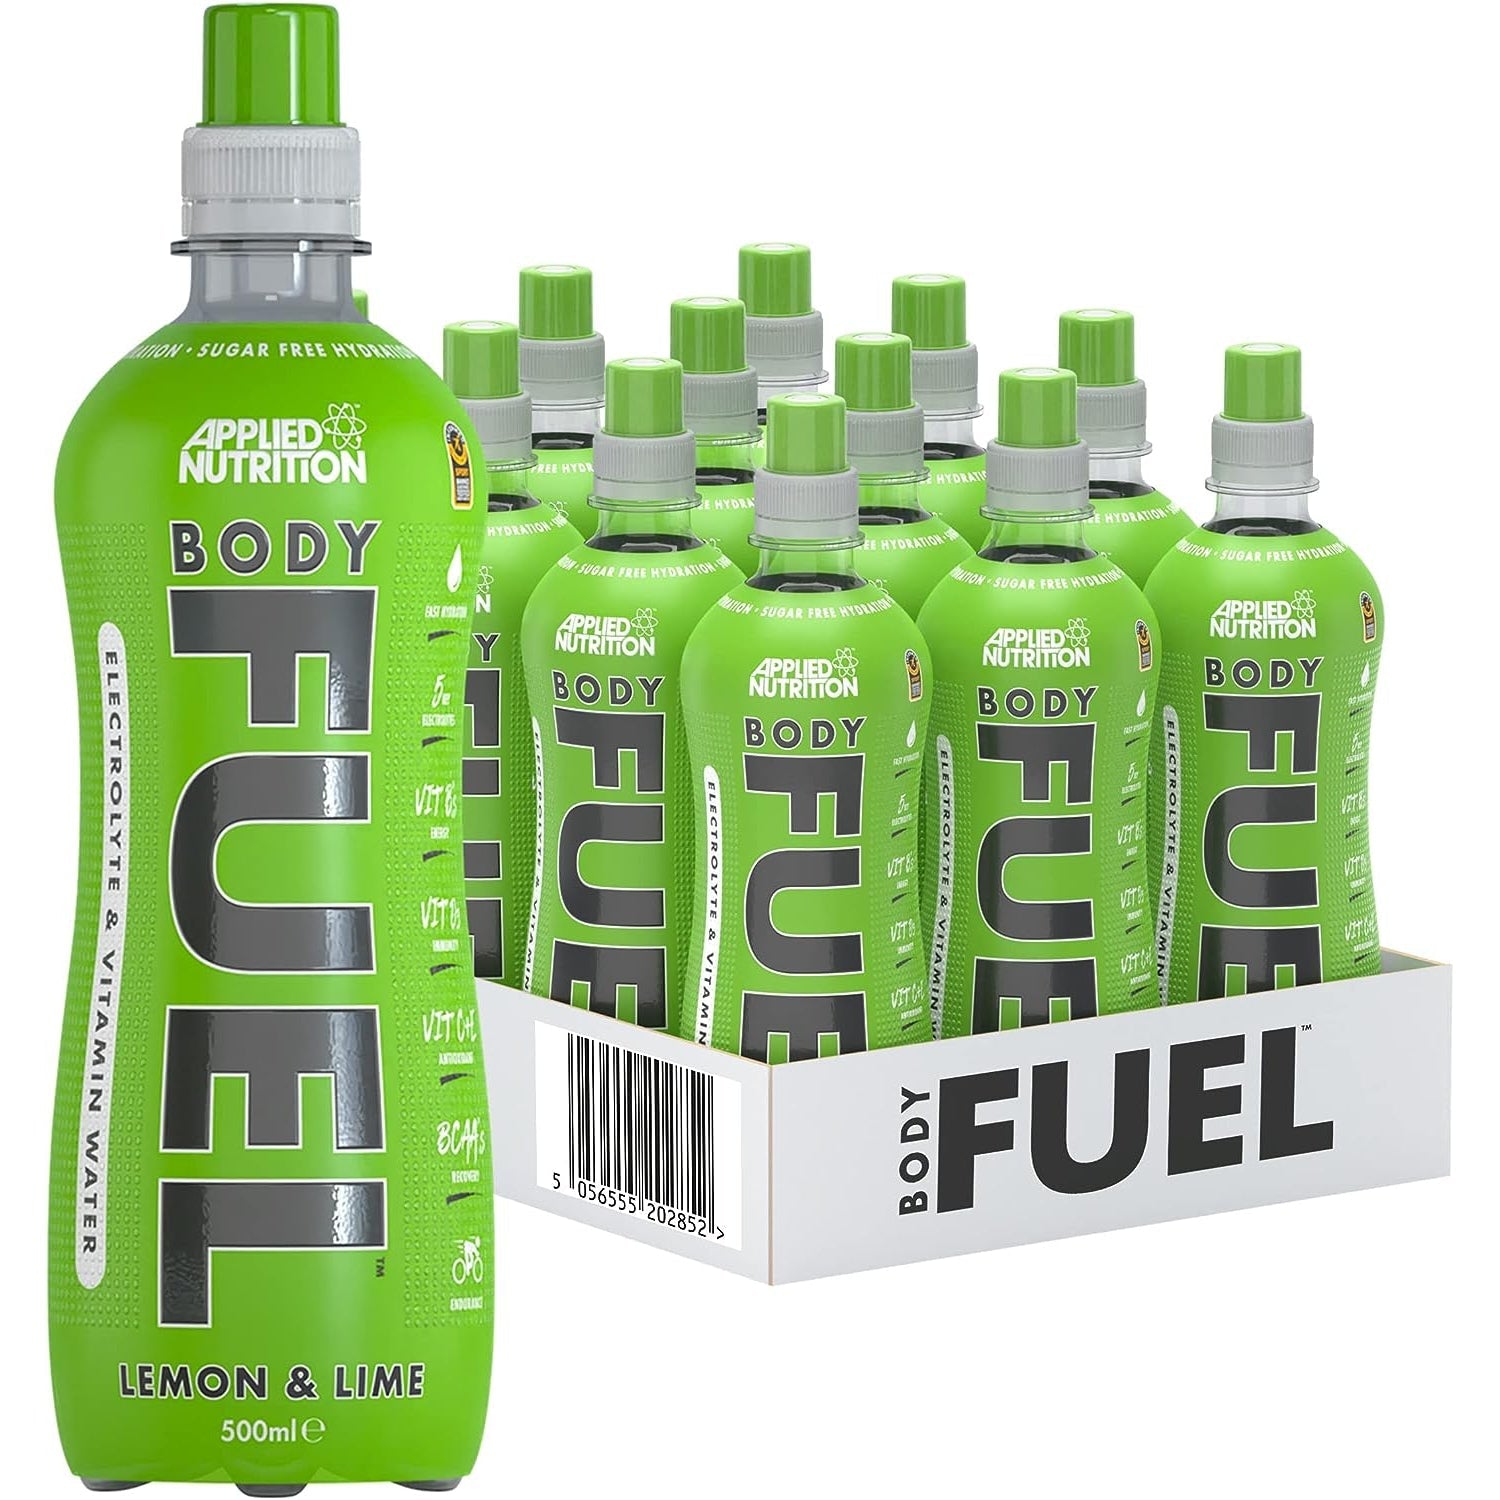 Applied Nutrition Body Fuel Electrolyte & Vitamin Water with BCAA 500ml Lemon & Lime